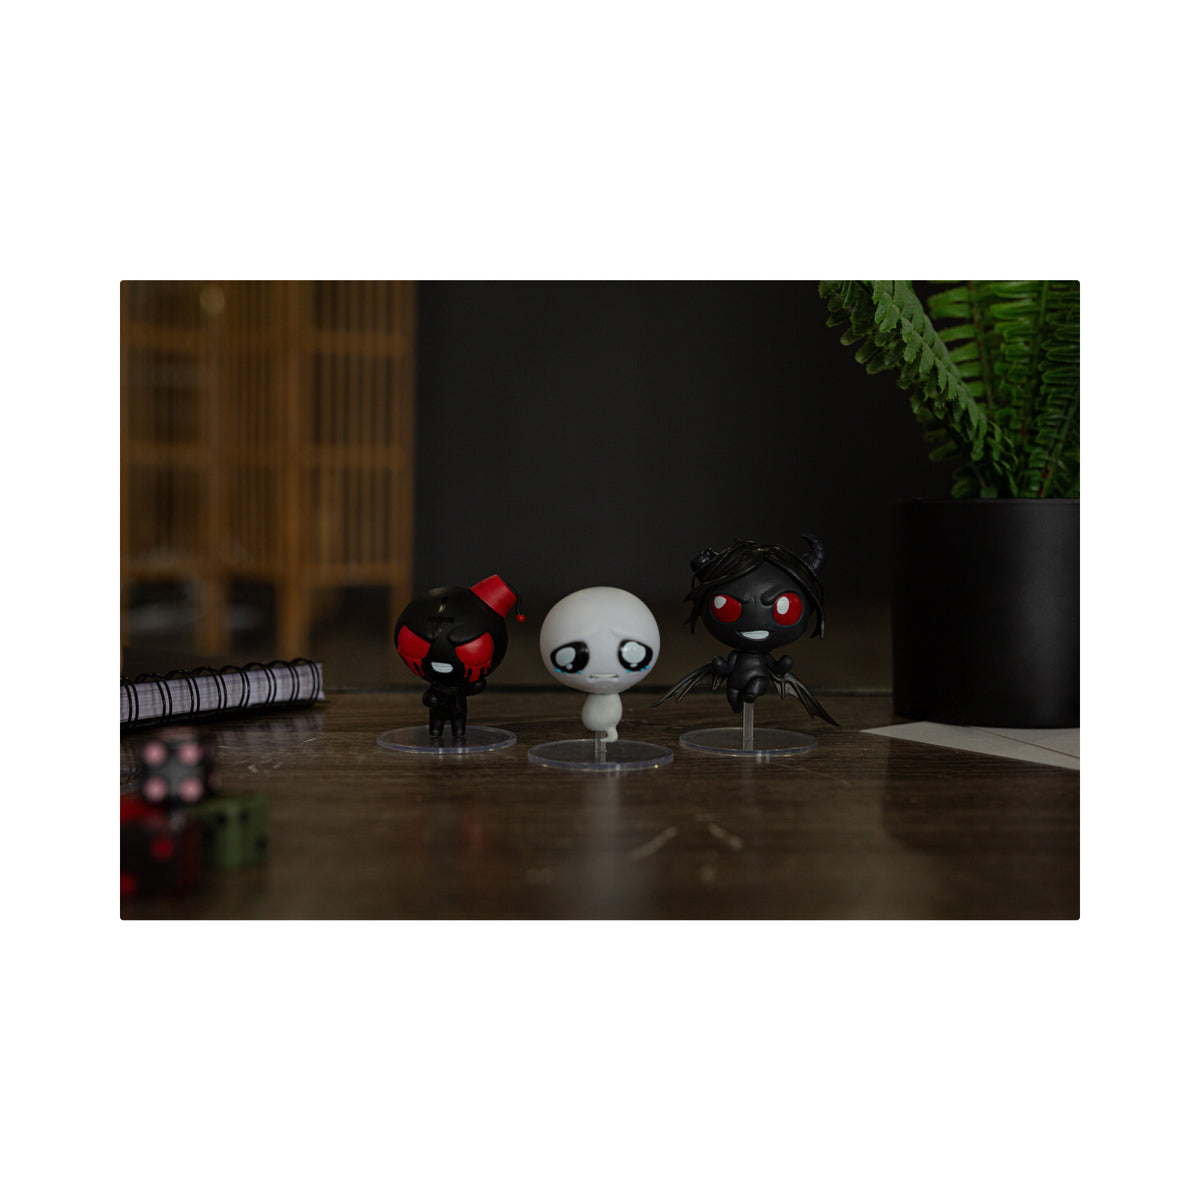 The Binding of Isaac 3 Figures Collection